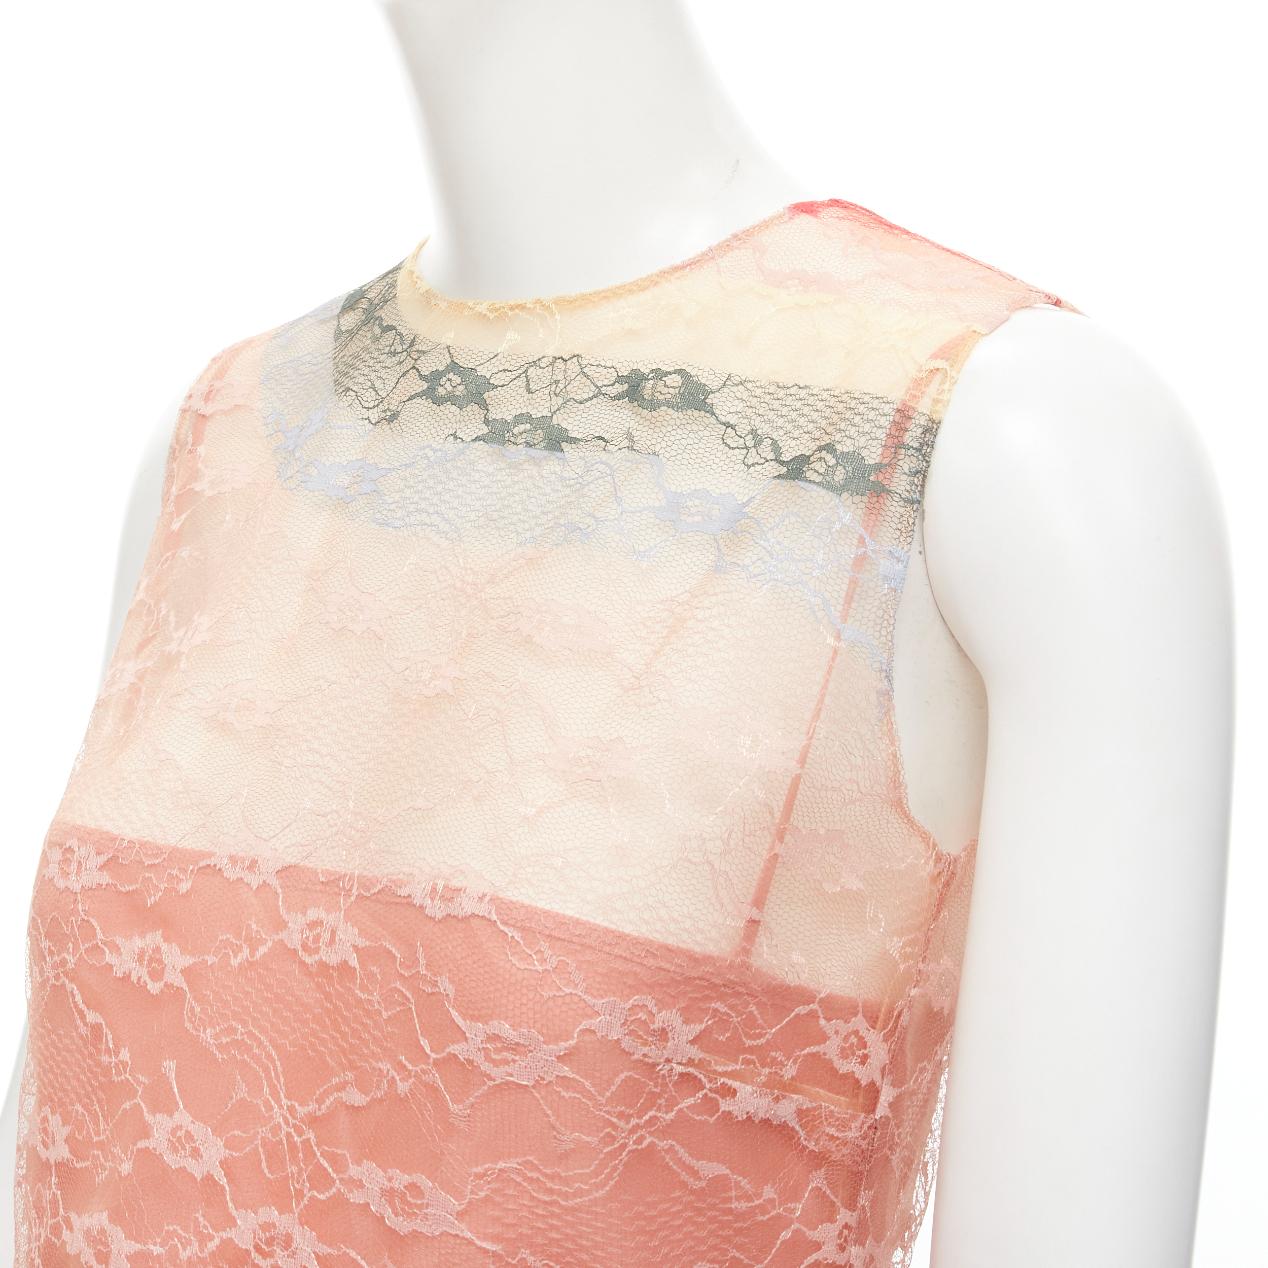 RED VALENTINO peach rainbow lace sleeveless fit flared cocktail dress IT40 S
Reference: CNLE/A00216
Brand: Red Valentino
Model: Lace dress
Material: Lace
Color: Peach, Multicolour
Pattern: Lace
Closure: Zip
Lining: Silk
Extra Details: Peach lace